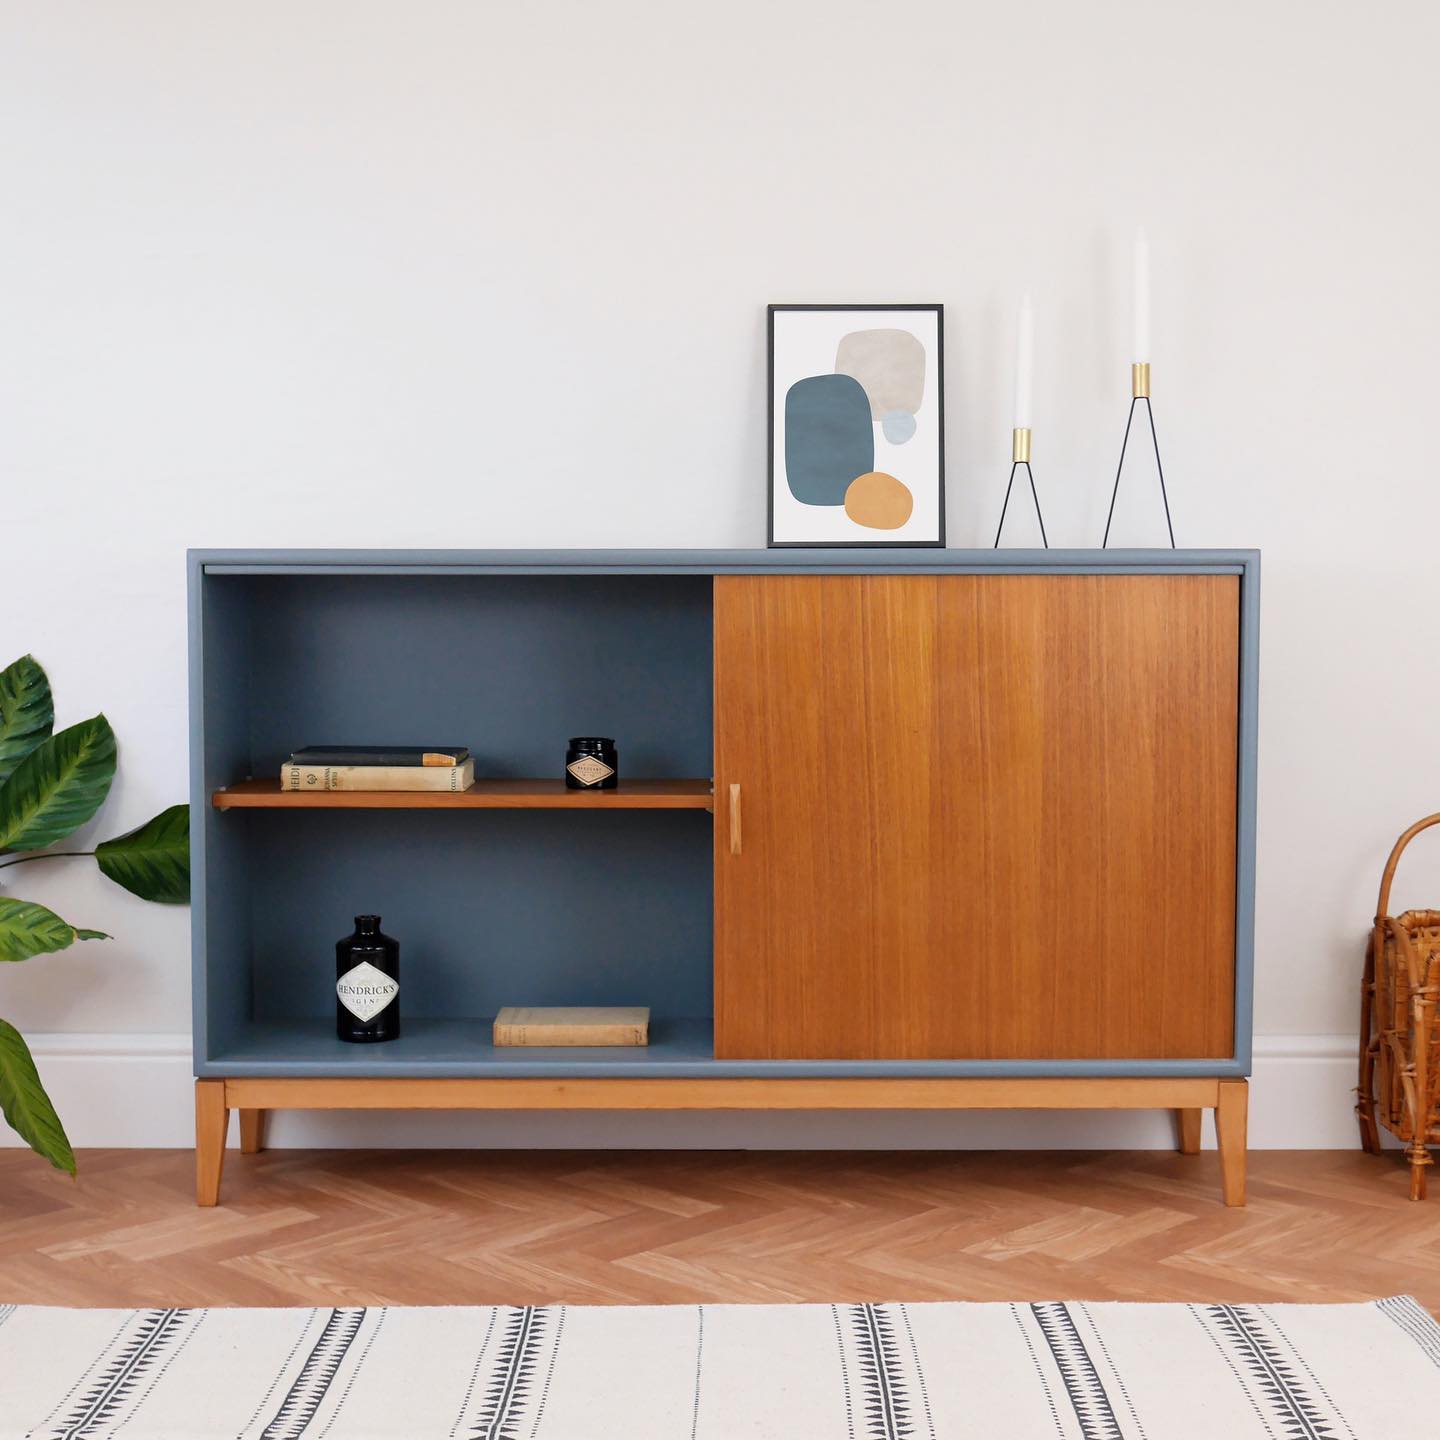 this is a beautiful customise designed sideboard by elizabeth dot design featured on etsy